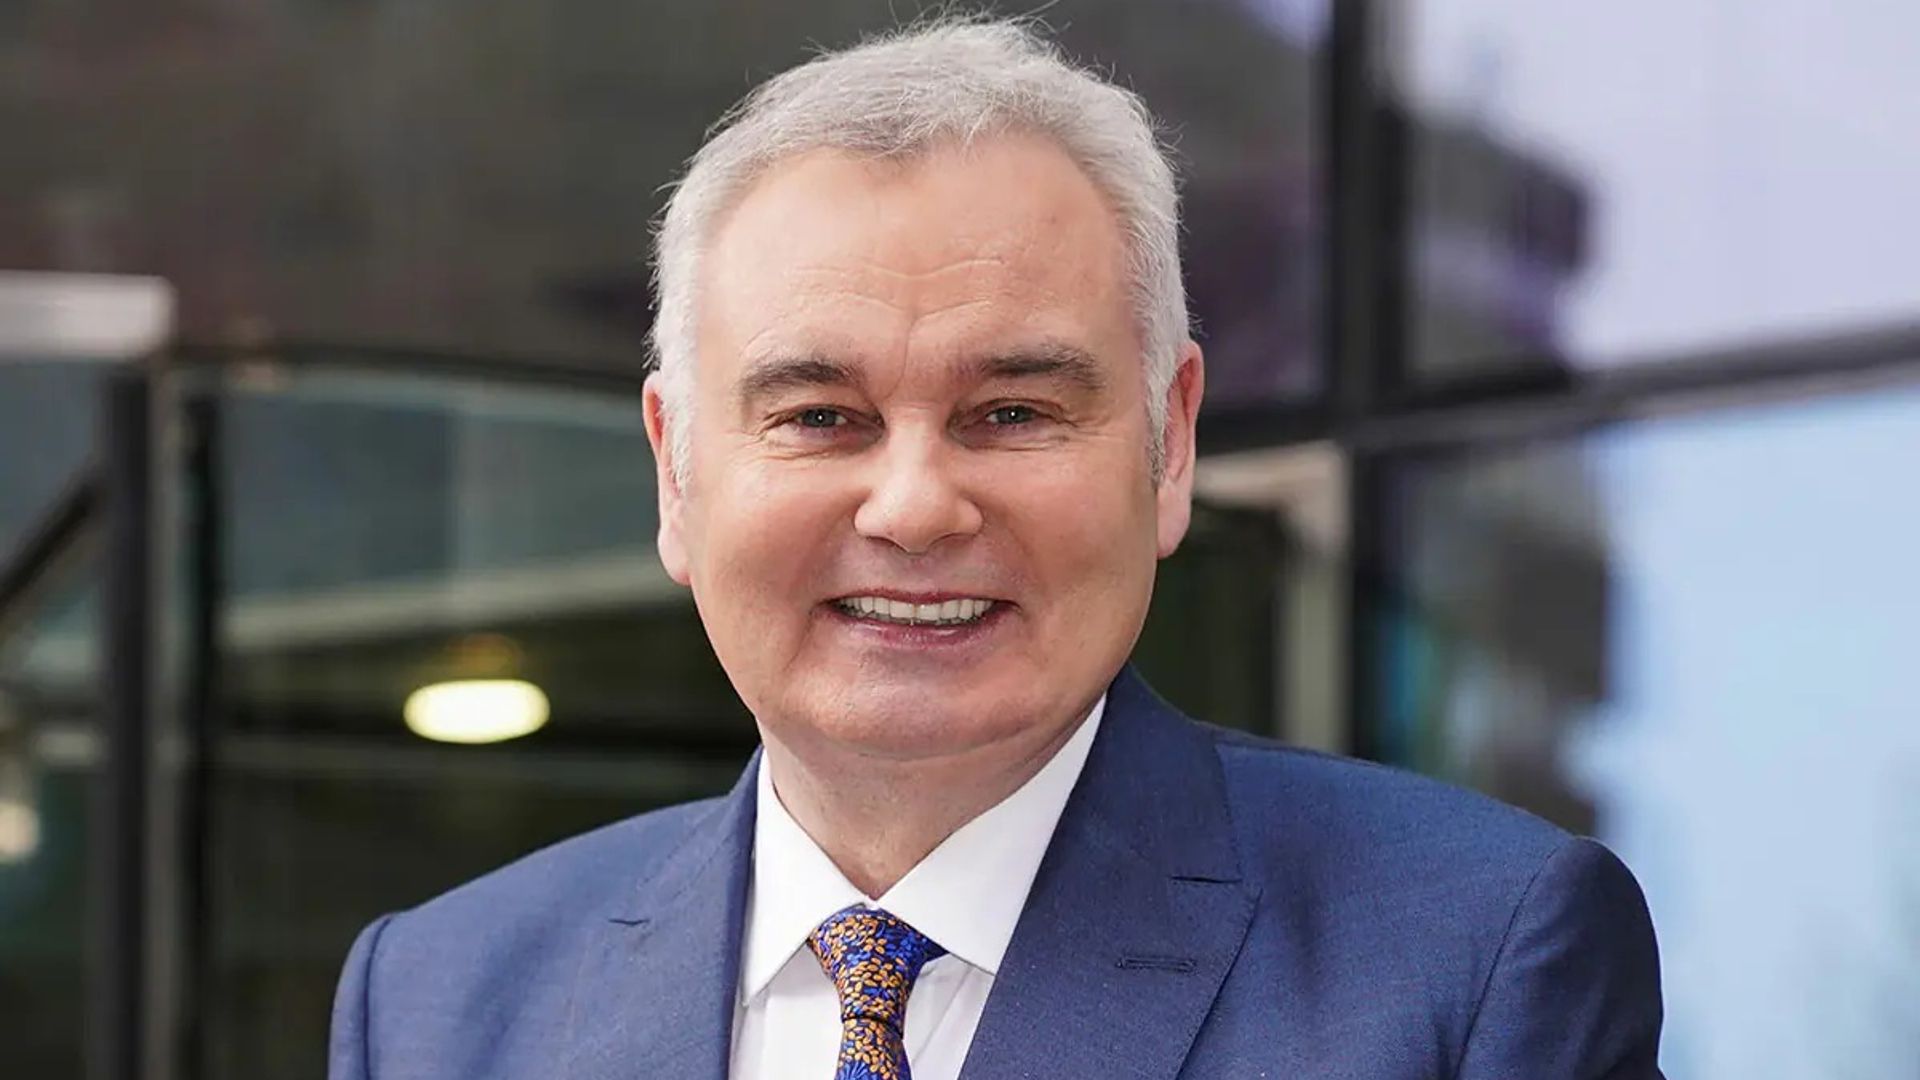 Eamonn Holmes speaks out after run-in with the police - fans react